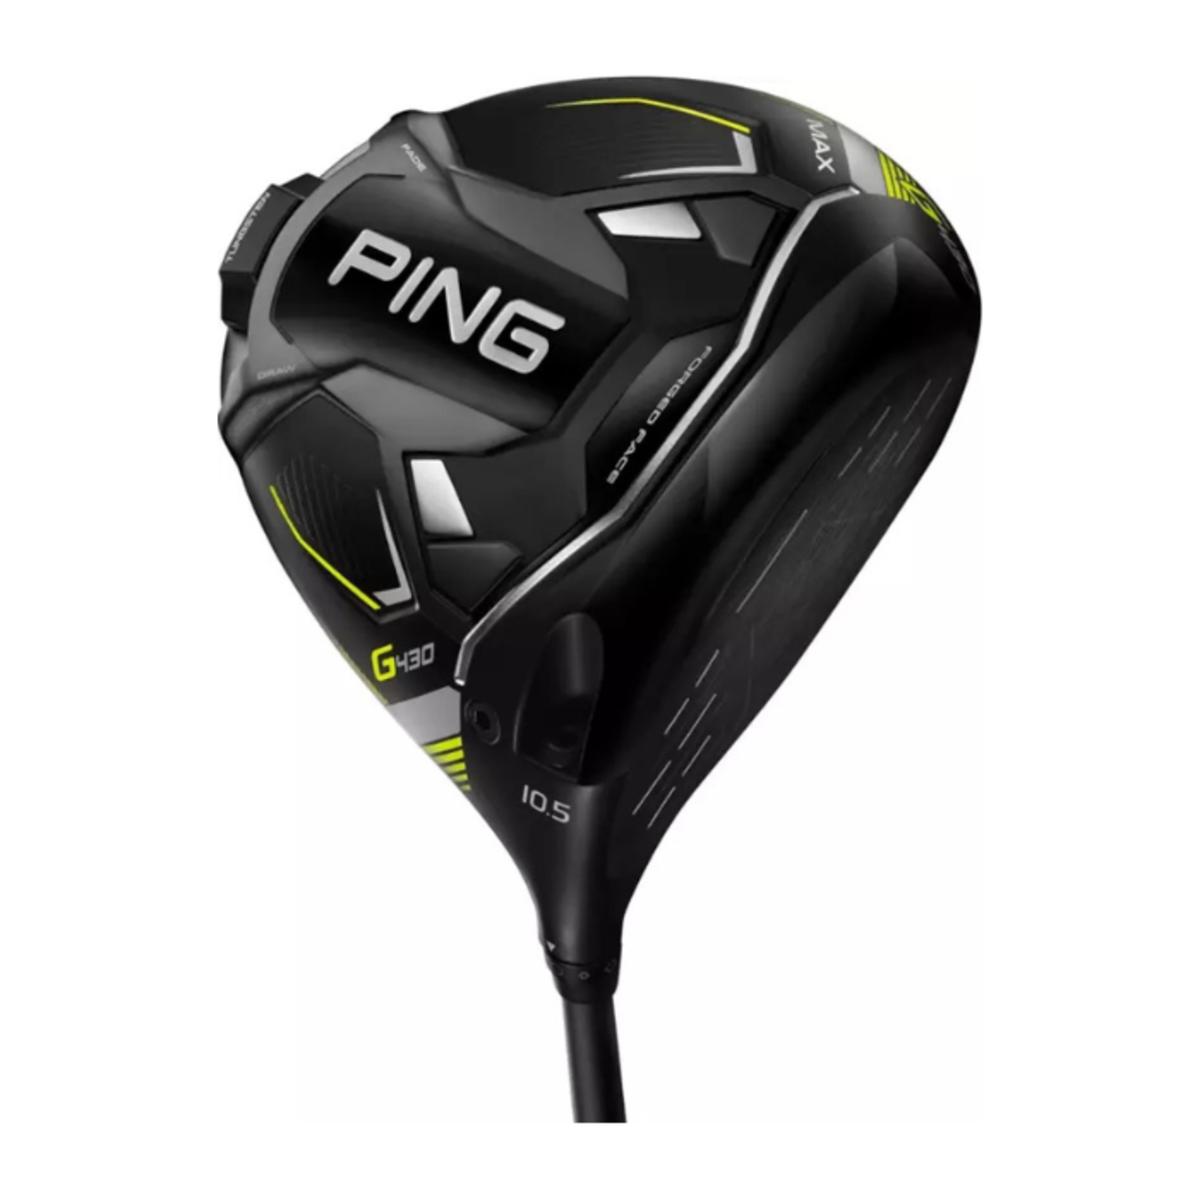 Ping's G430 Max Driver